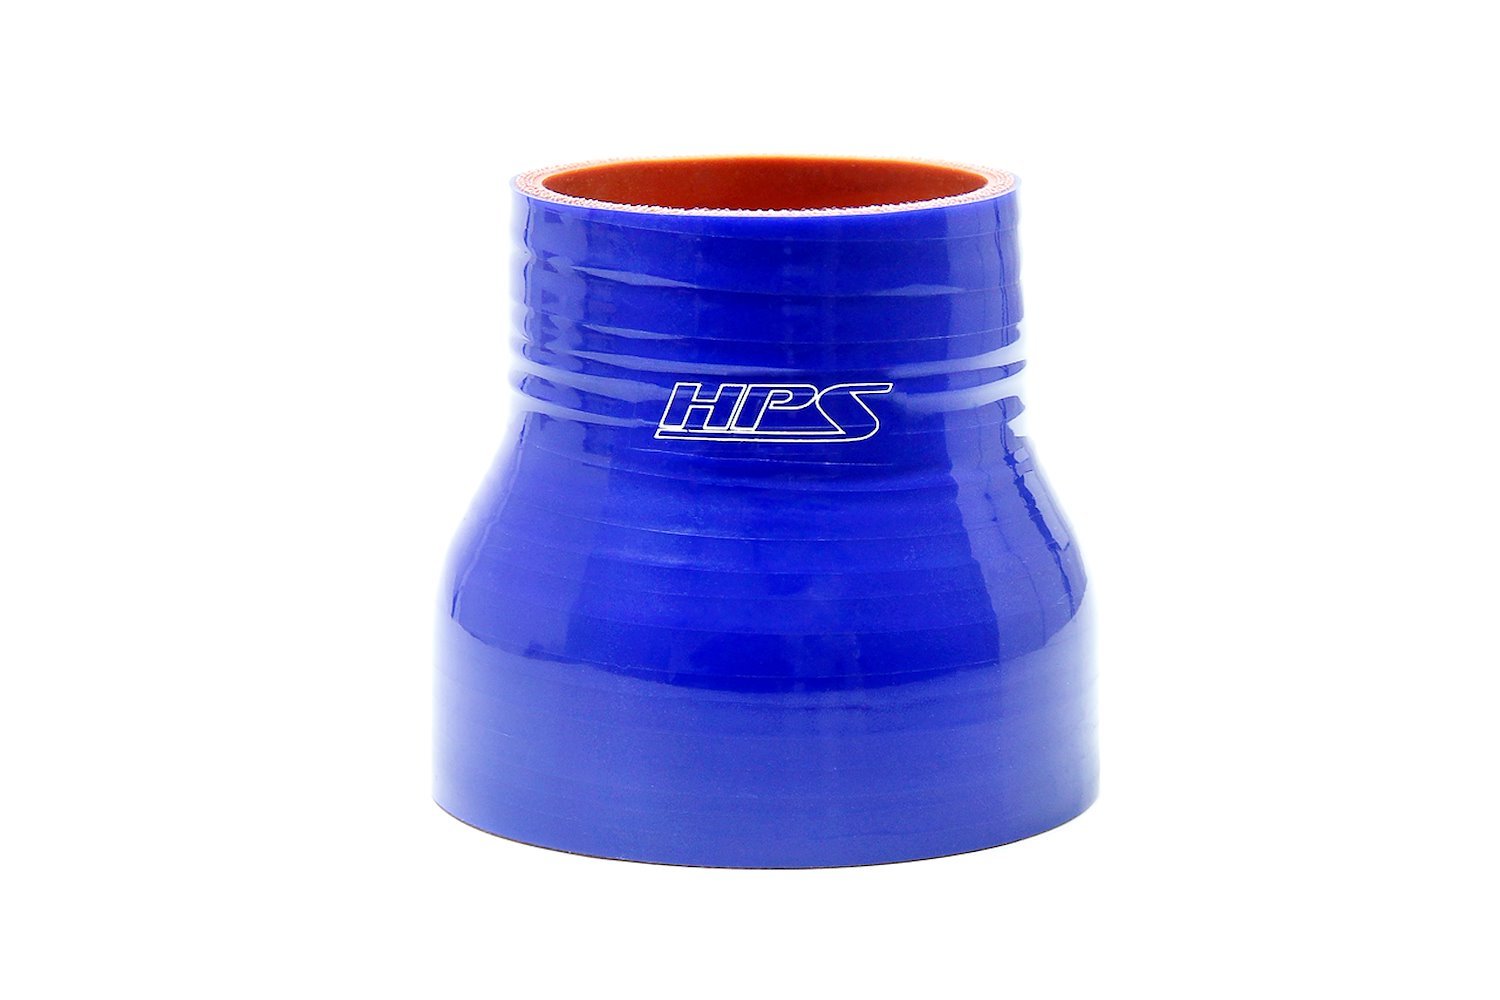 HTSR-150-200-BLUE Silicone Reducer Hose, High-Temp 4-Ply Reinforced, 1-1/2 in. - 2 in. ID, 3 in. Long, Blue